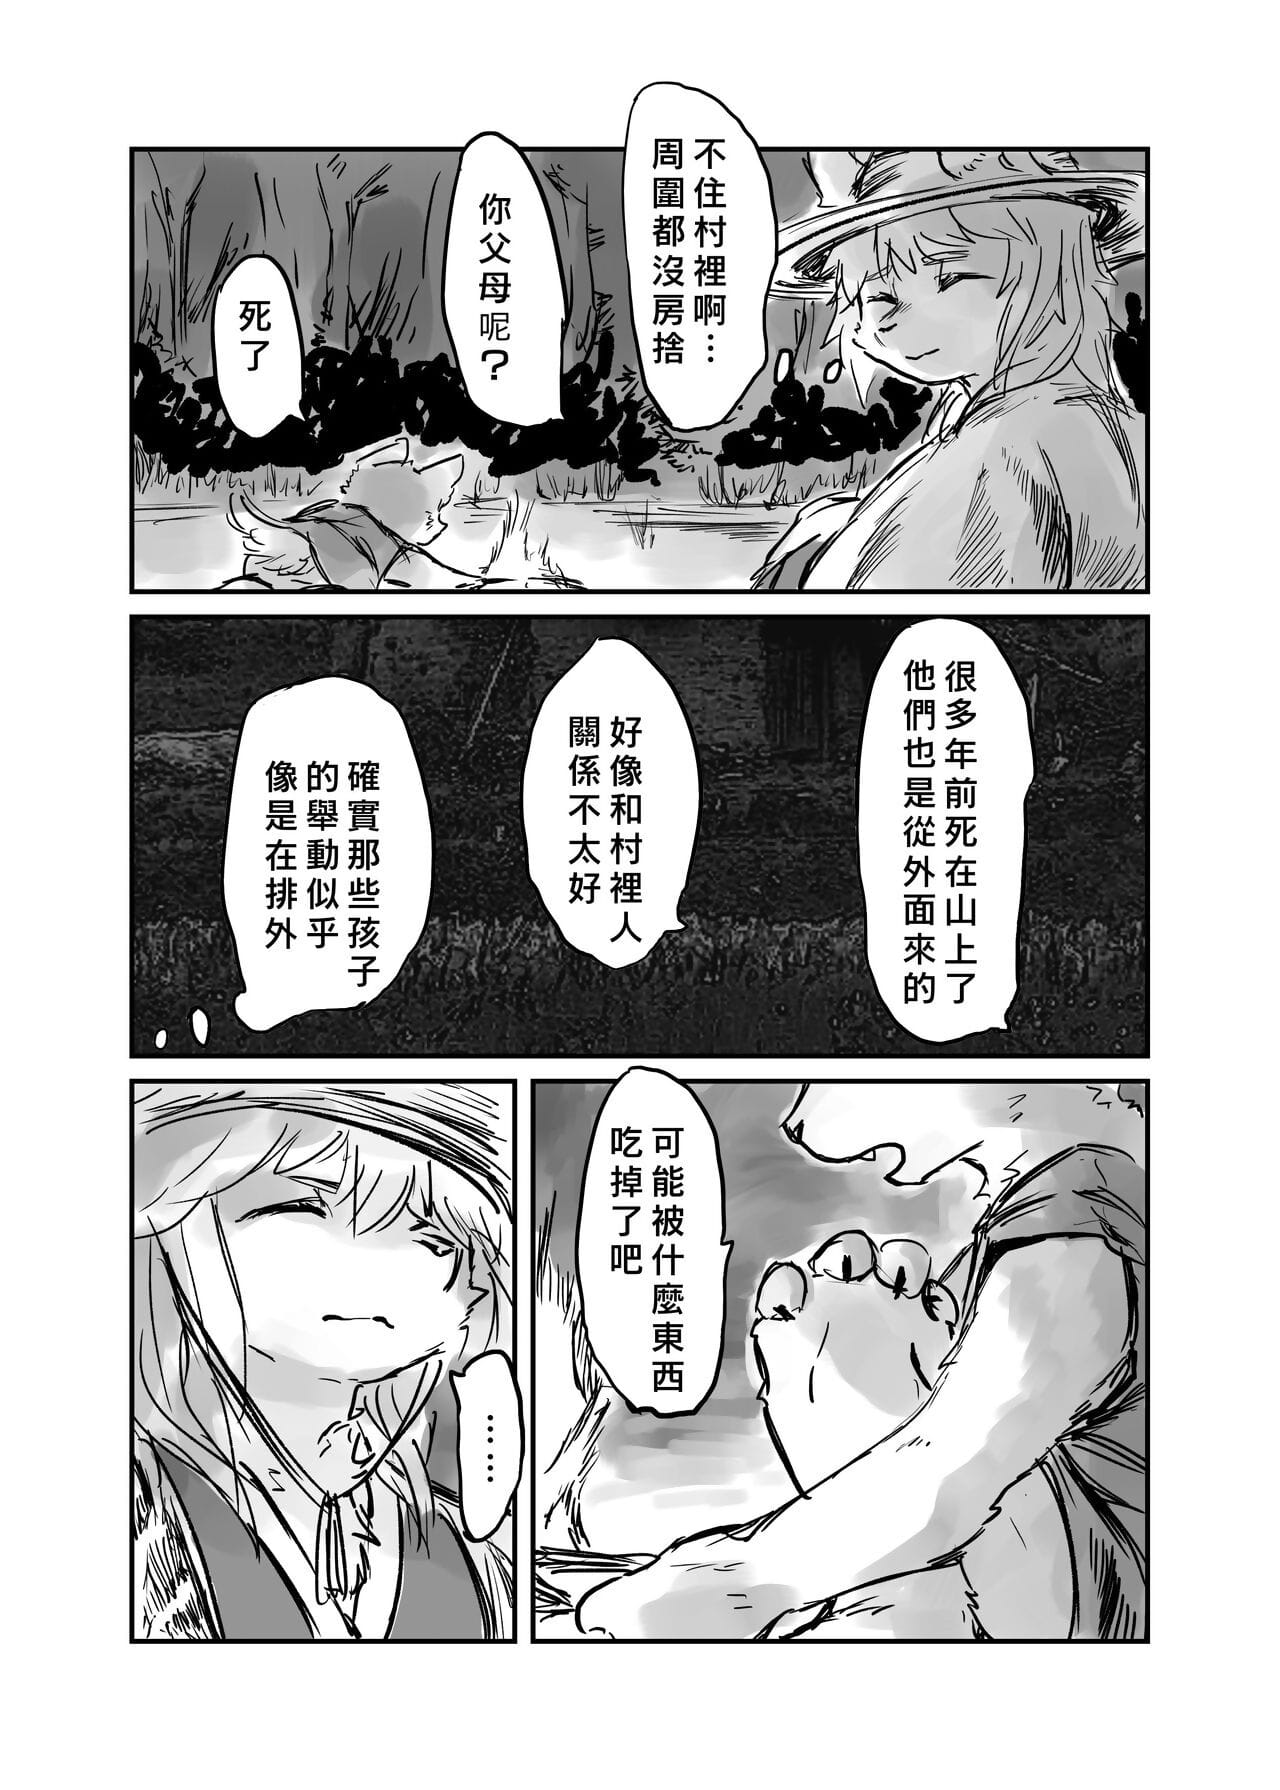 （the زائر 他乡之人 by：鬼流 page 1